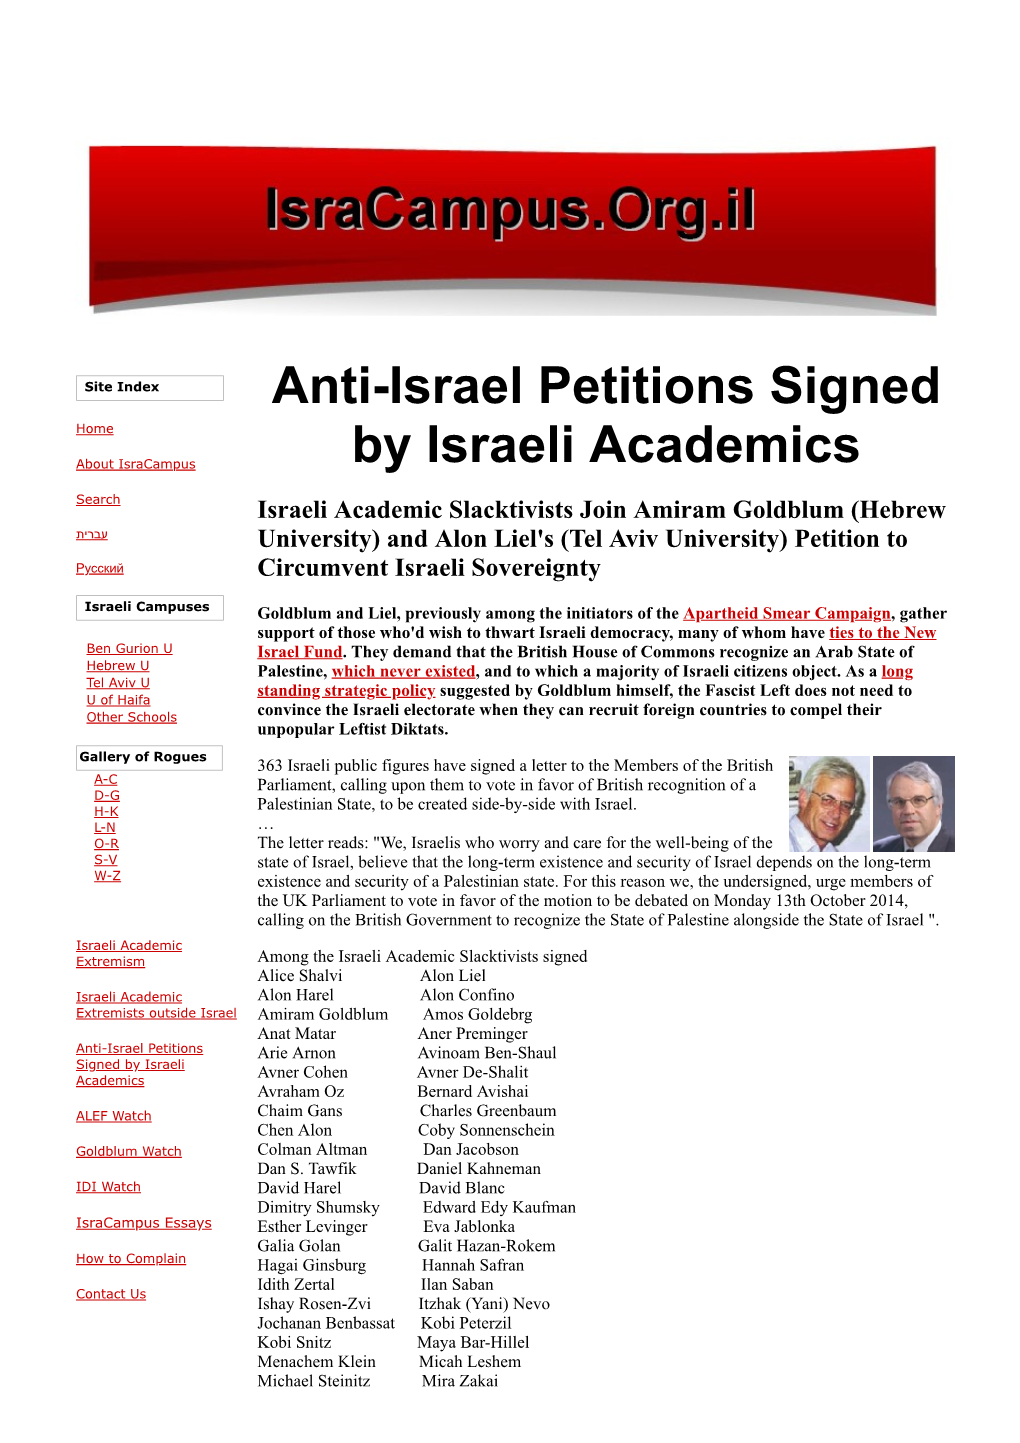 Anti-Israel Petitions Signed by Israeli Academics